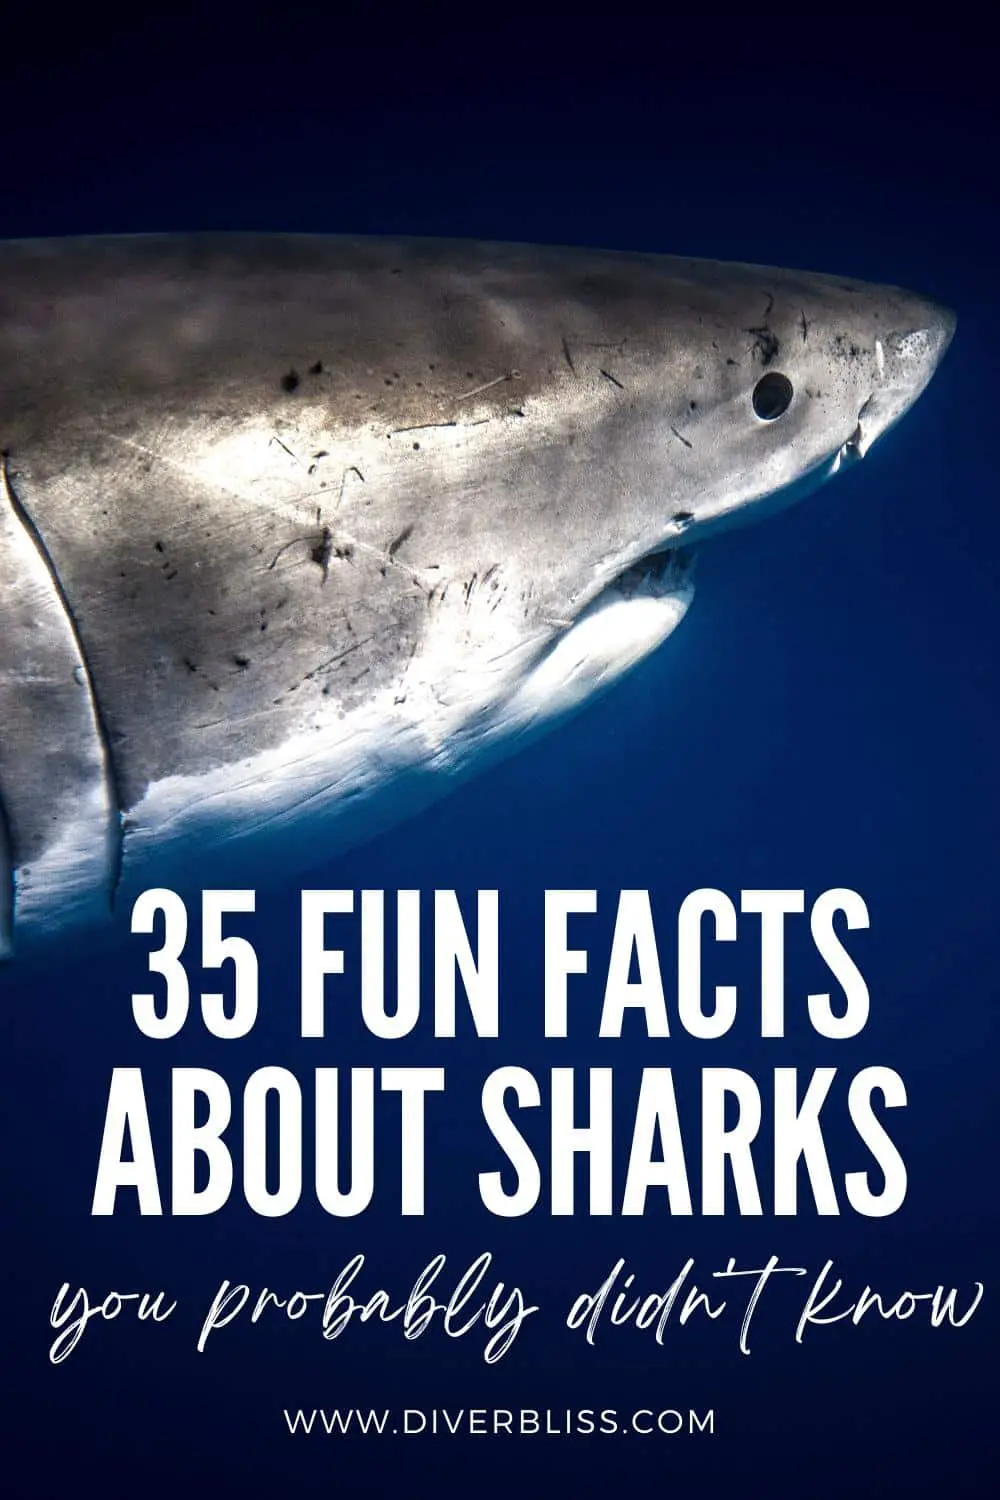 35 fun facts about sharks you probably didn't know